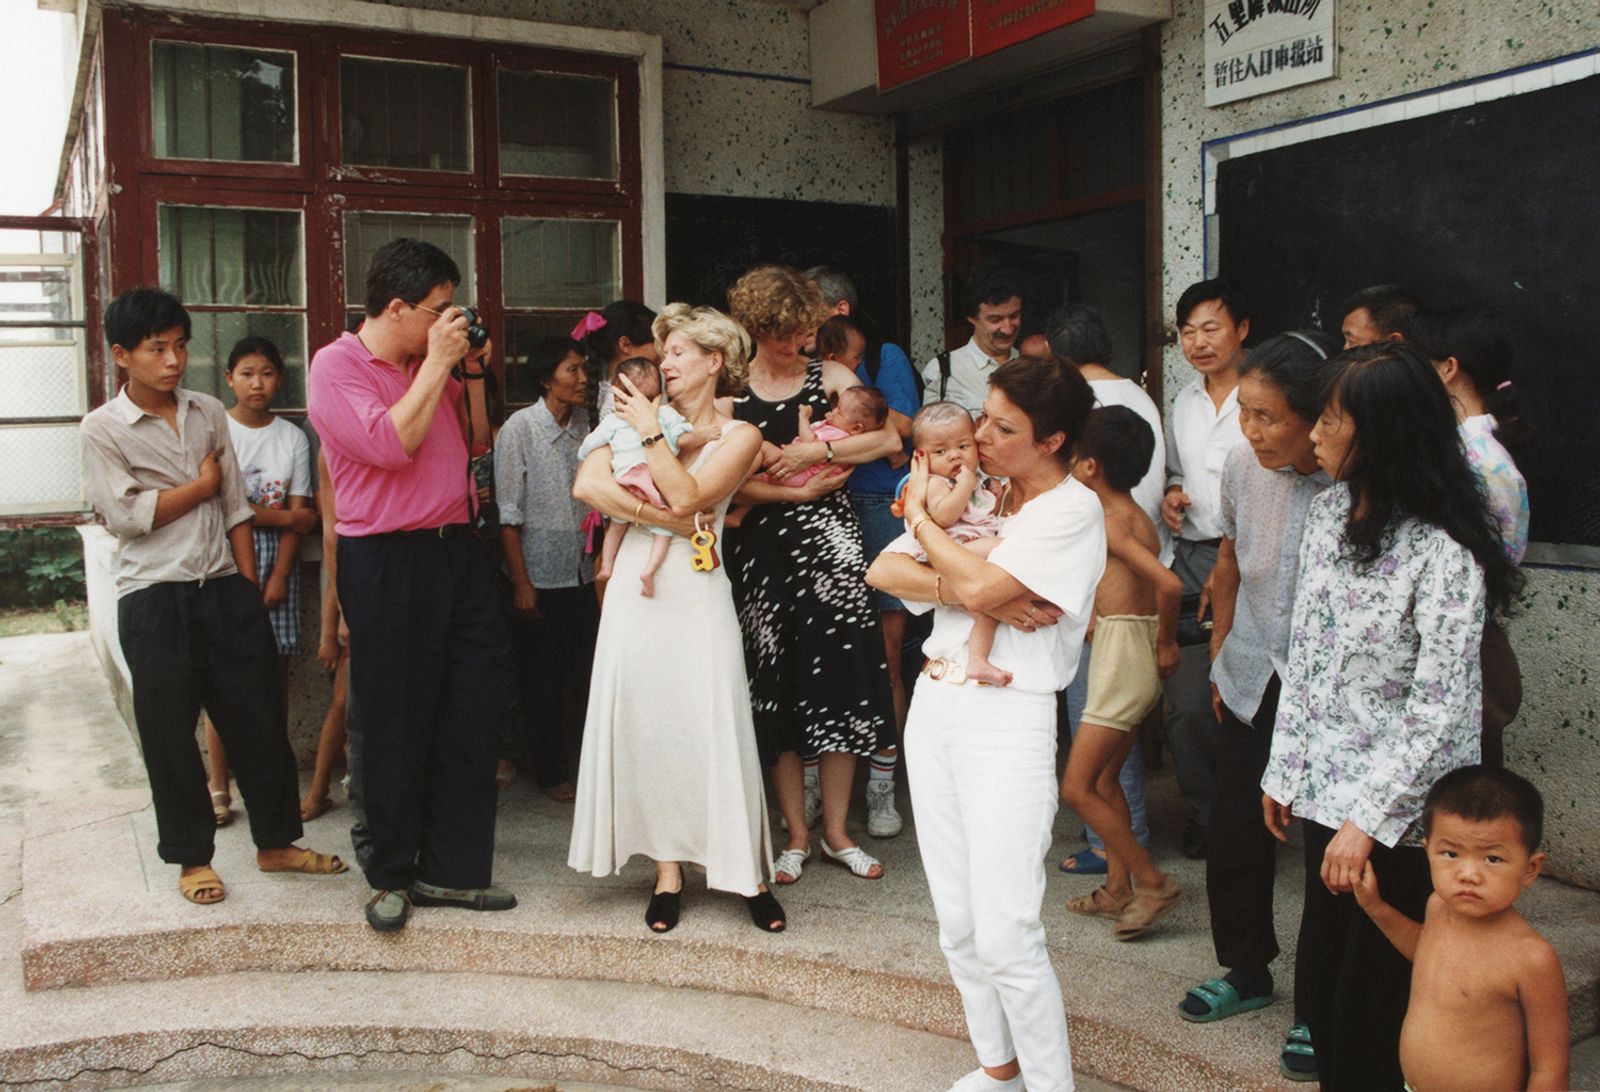 © Youqine Lefèvre - Archive photo taken in 1994 at the Yueyang Social Welfare Center by one of the adoptive parents.